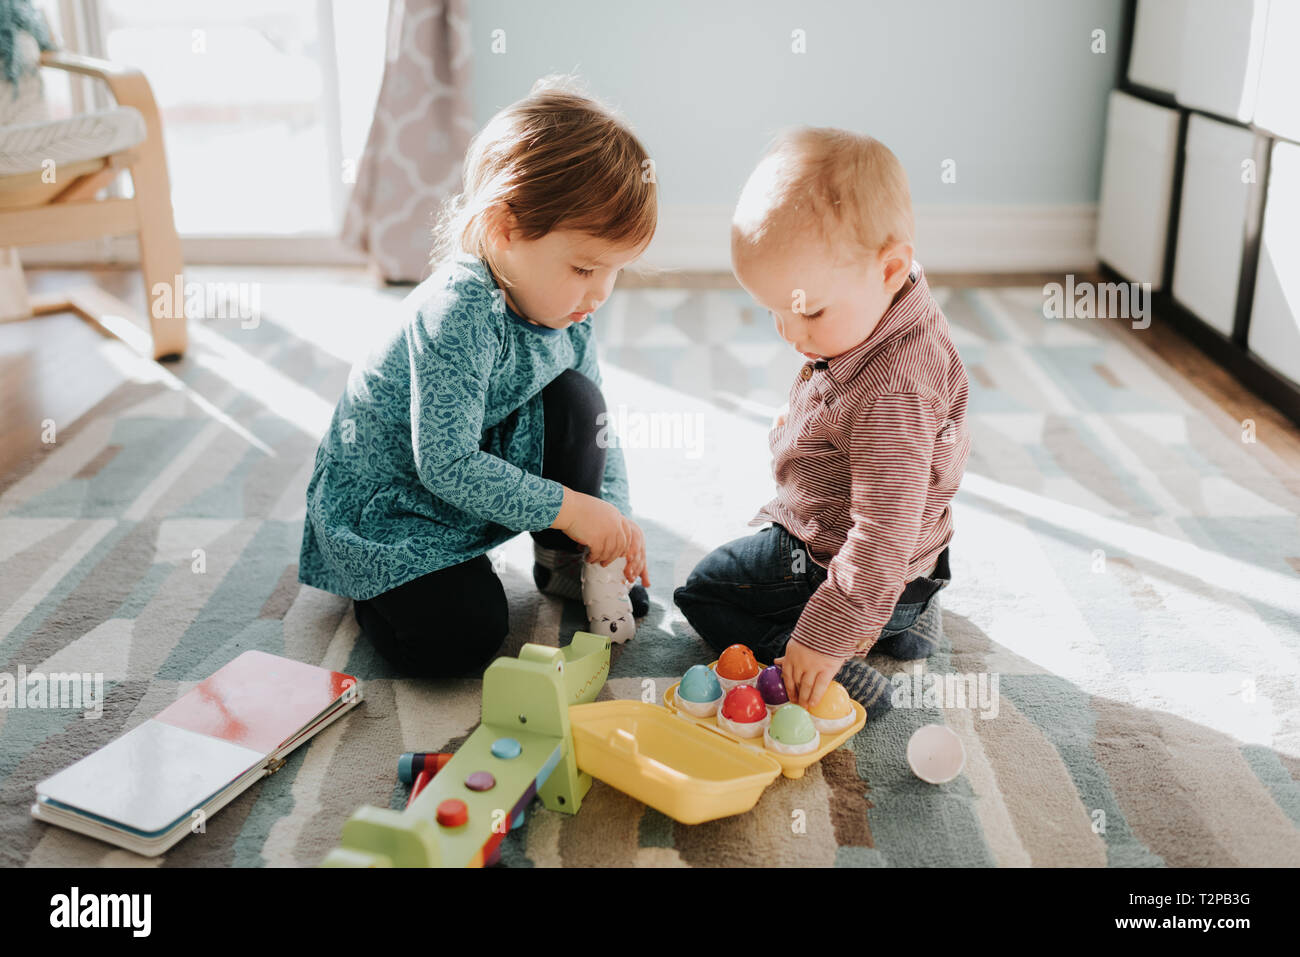 Female toddler Playing with baby brother in living room Banque D'Images